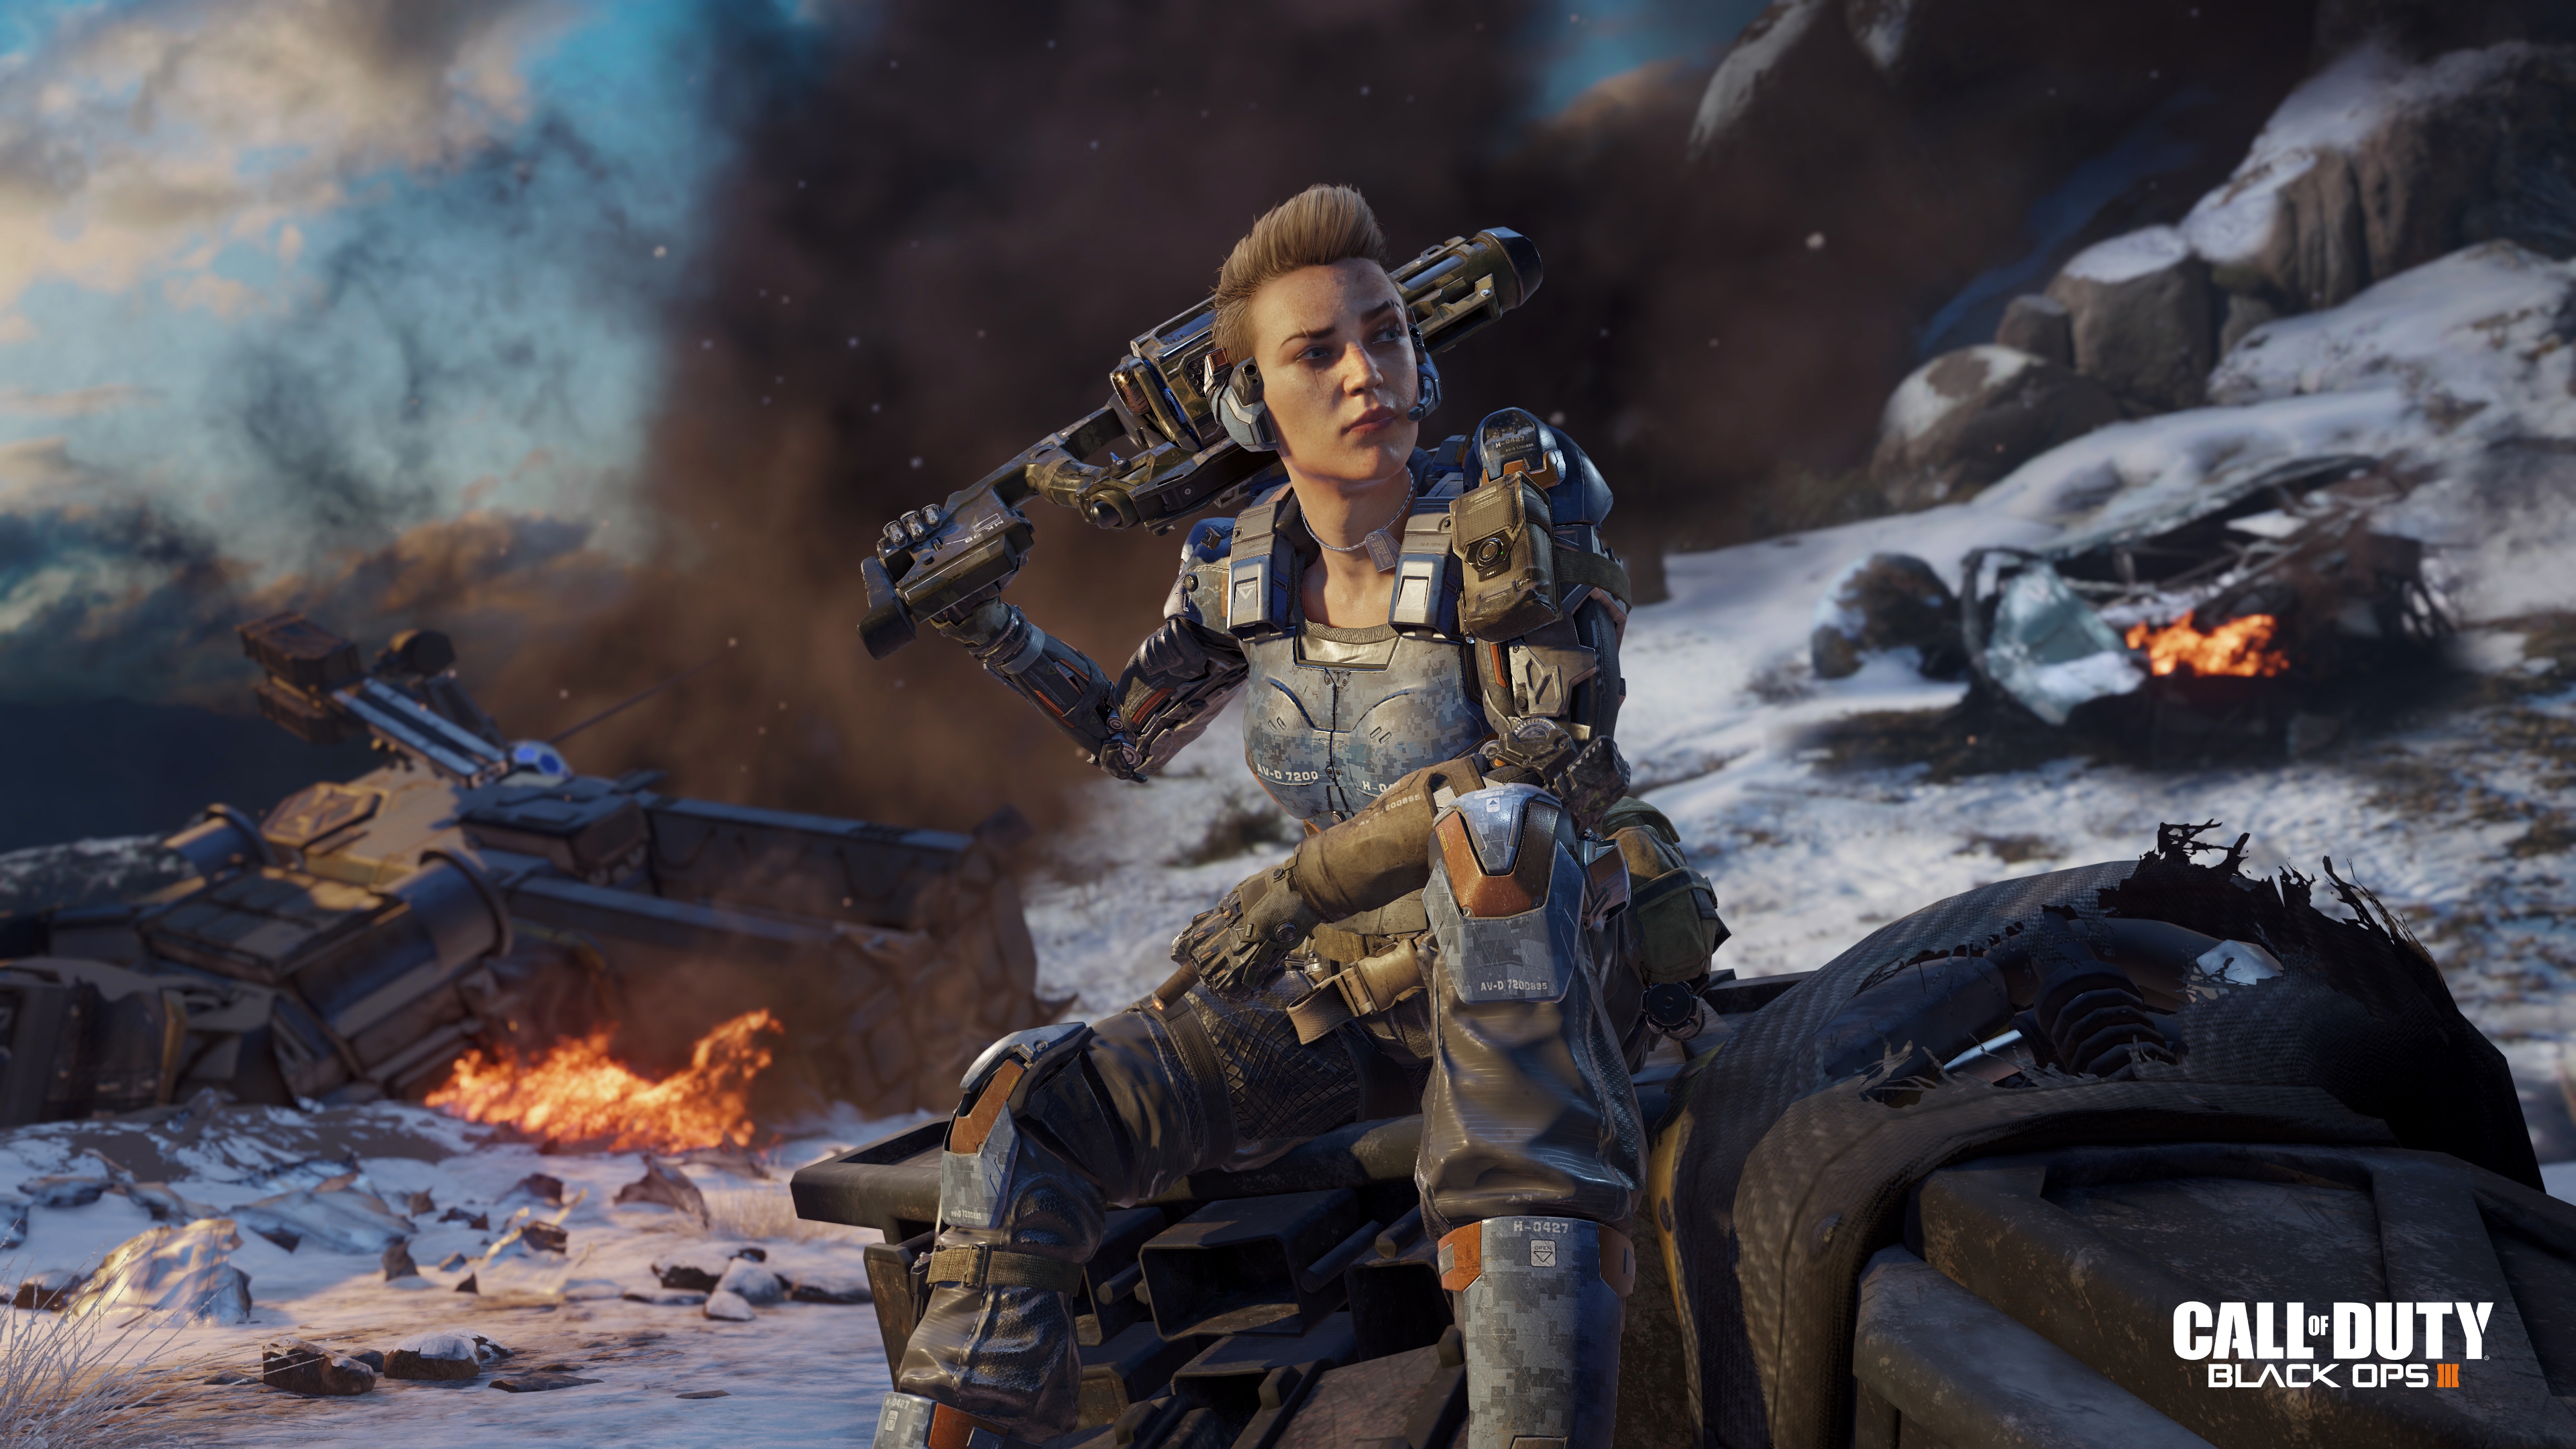 Call of Duty Black Ops 3 Girl for 3840 x 2160 Ultra HD resolution